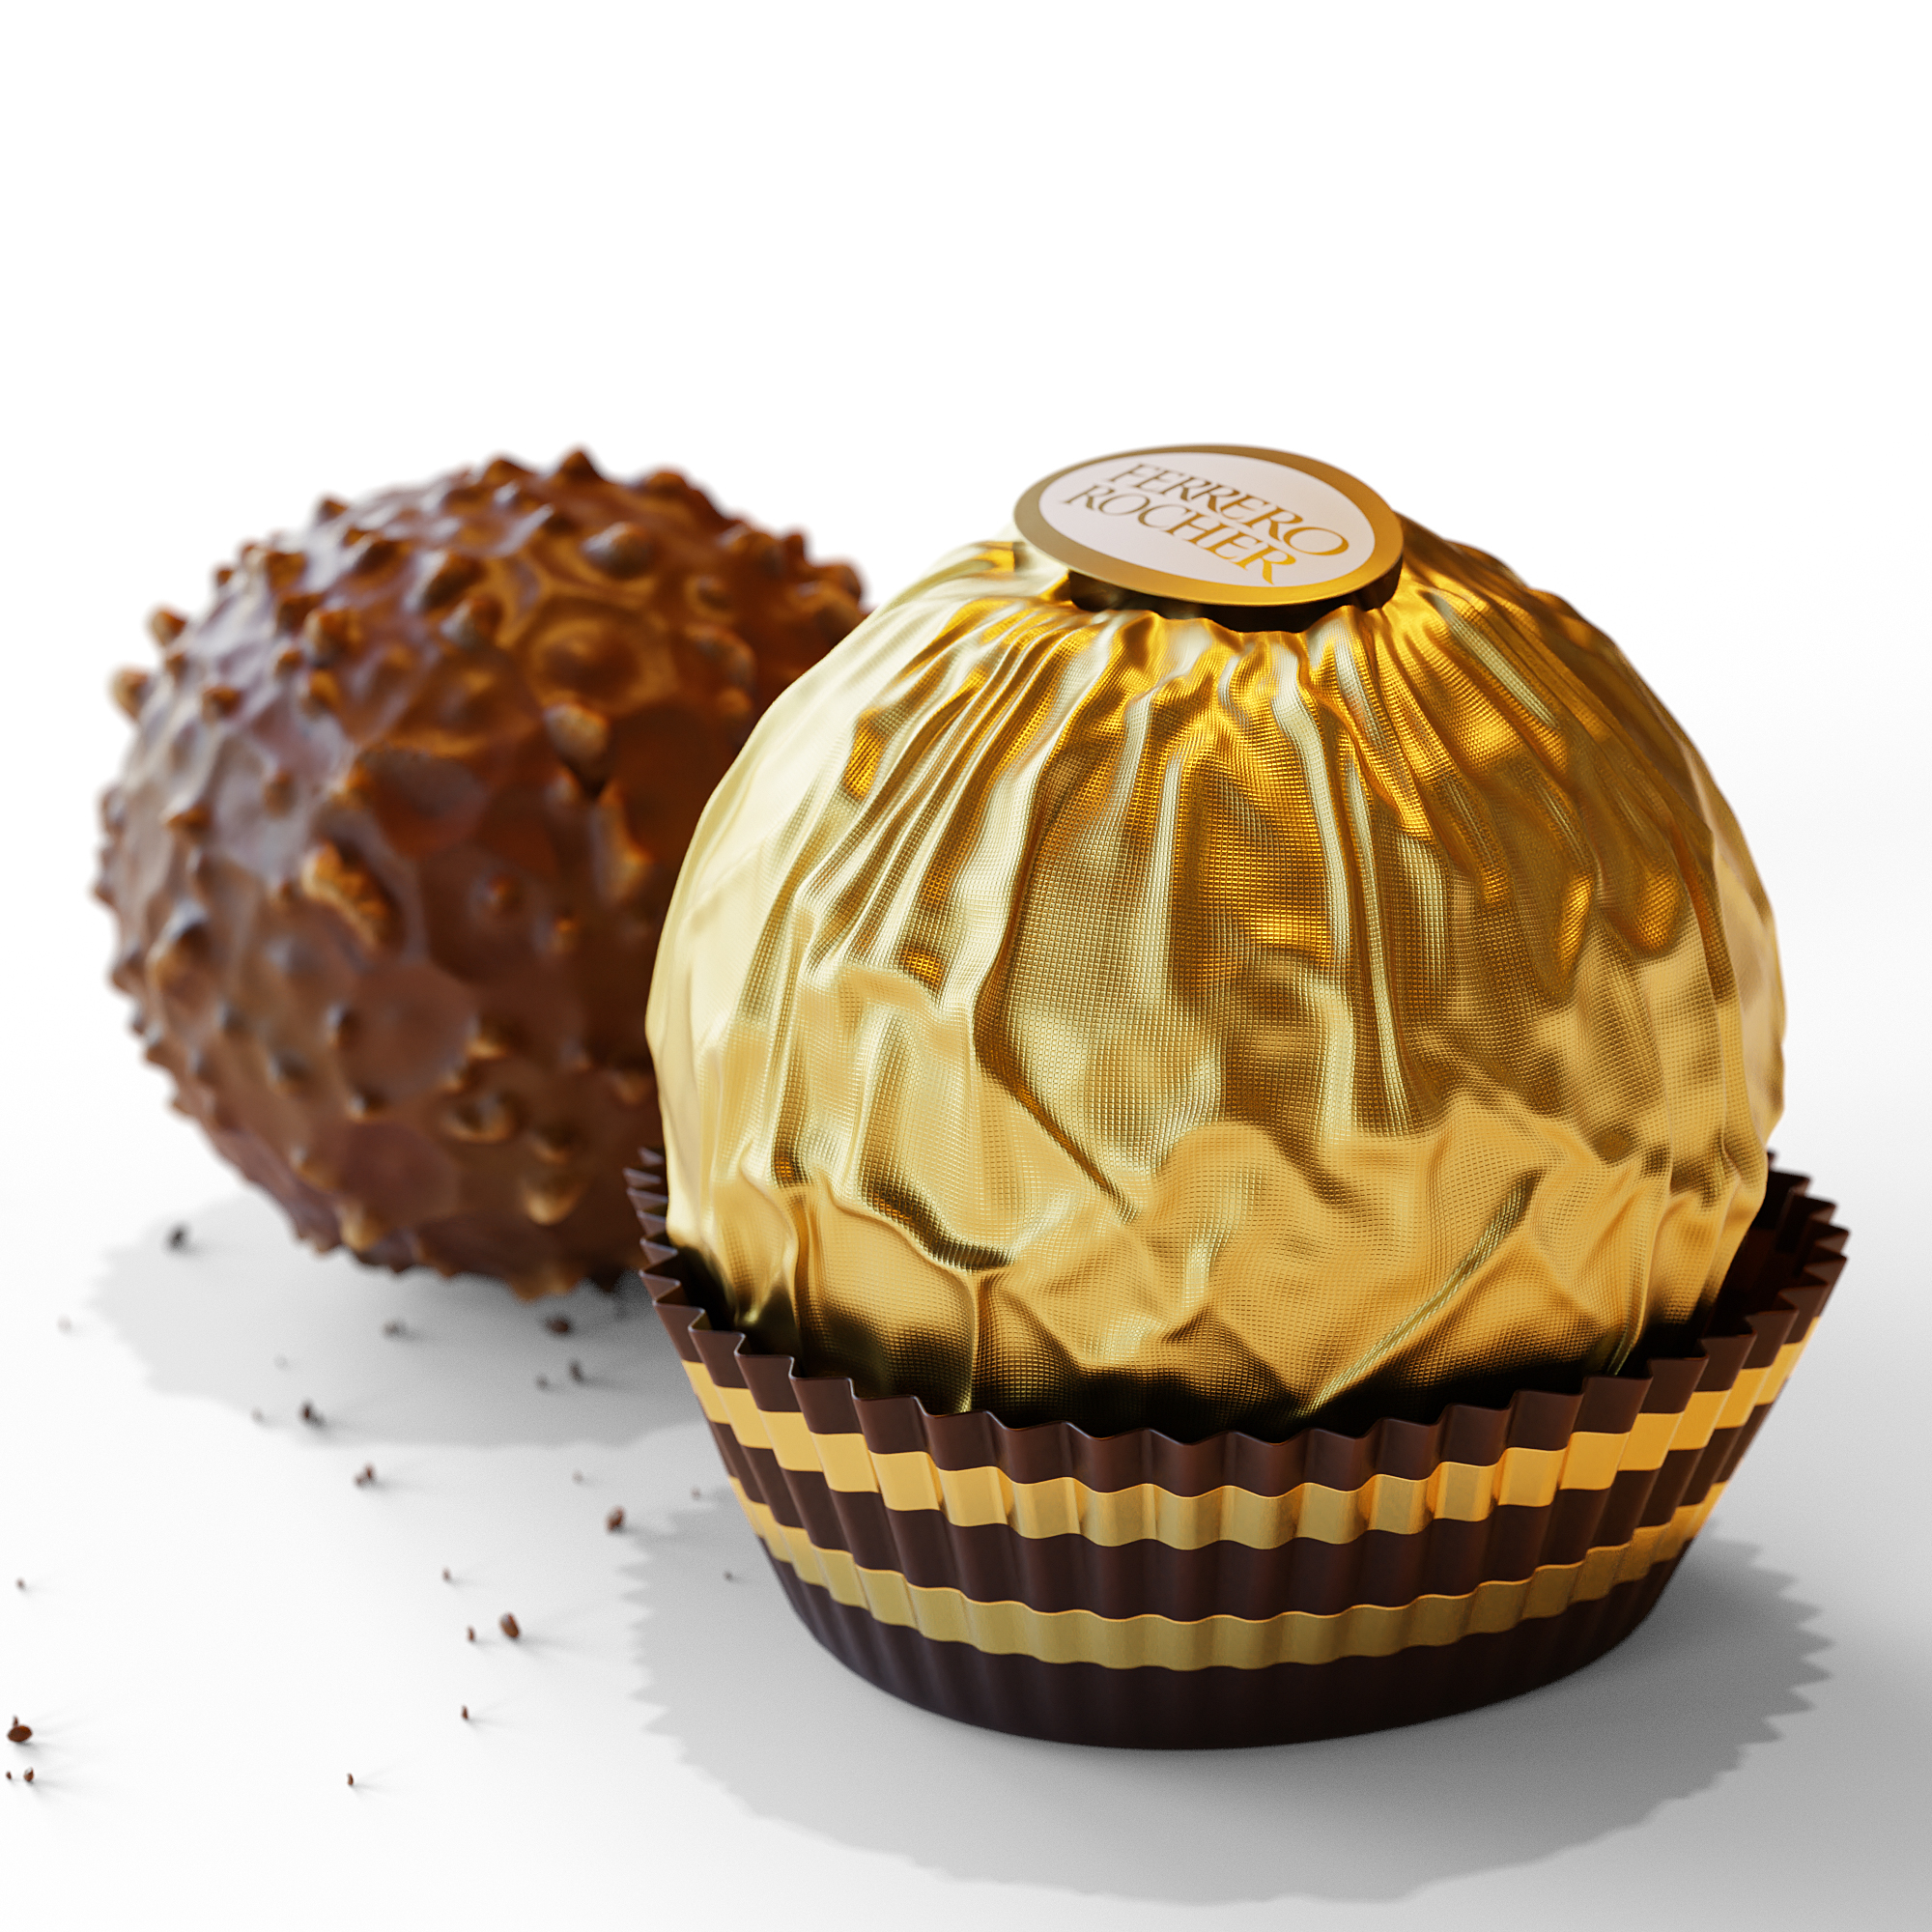 Ferrero Rocher chocolates - Finished Projects - Blender Artists Community